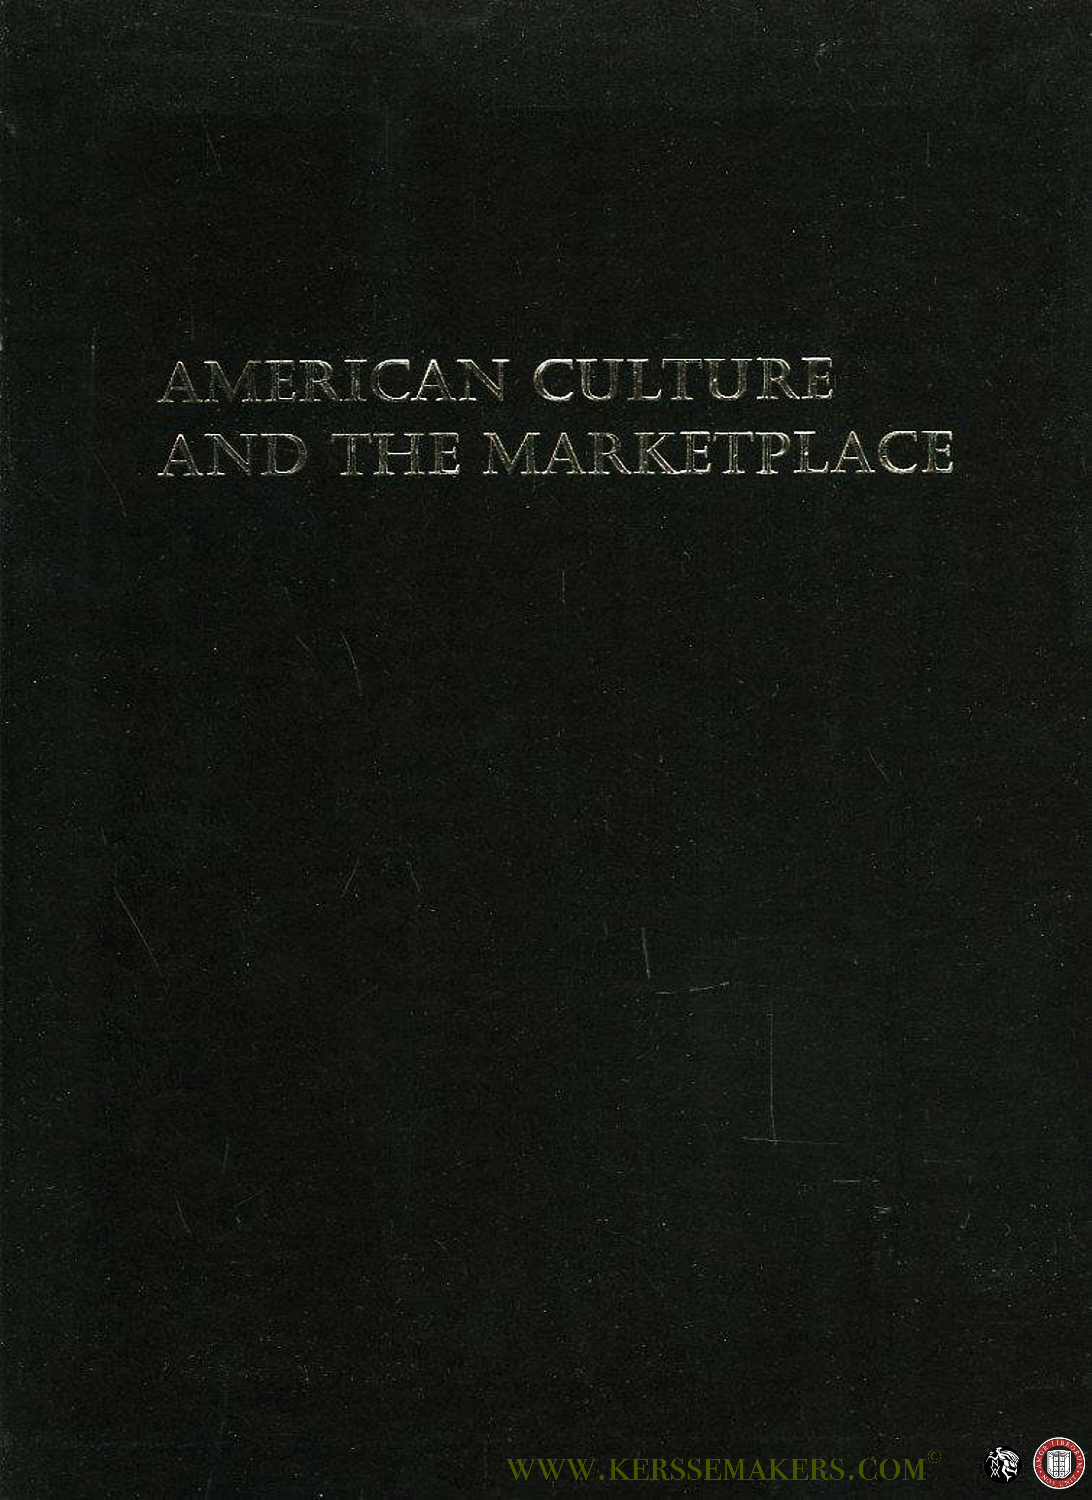 American Culture and the Marketplace. R.R. Donnelley's Four American Books Campaign, 1926-1930. - BADARACCO, Claire